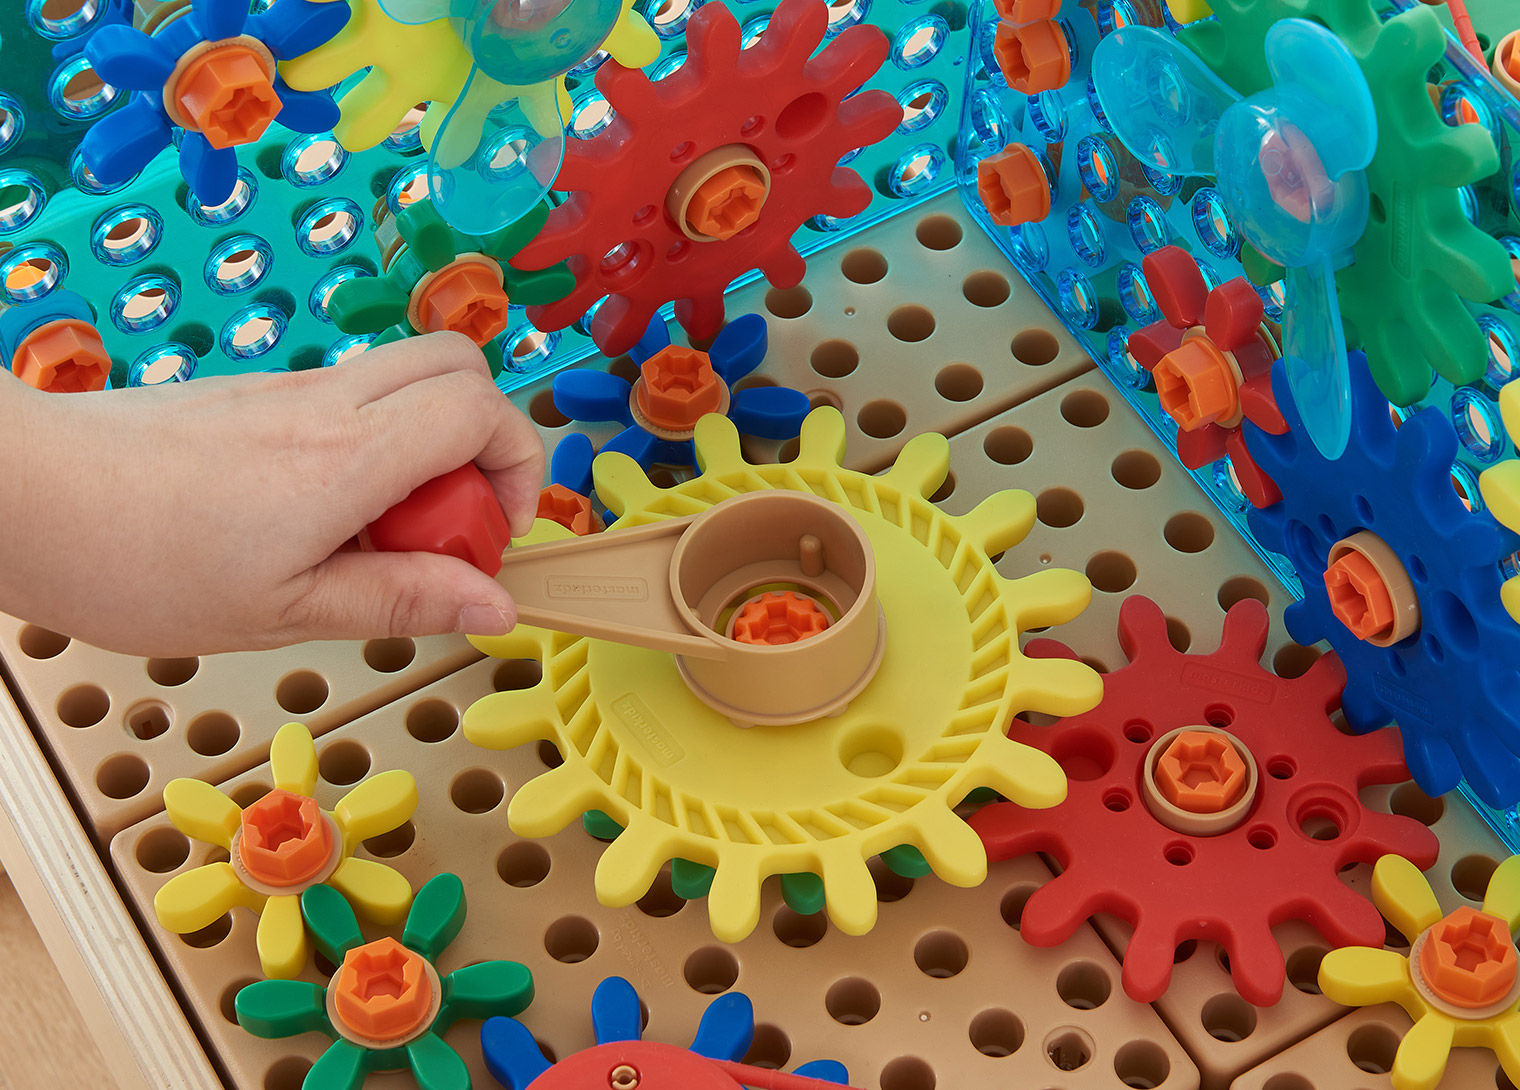 Advanced Level Gears and Pulleys Kit (198 pieces)